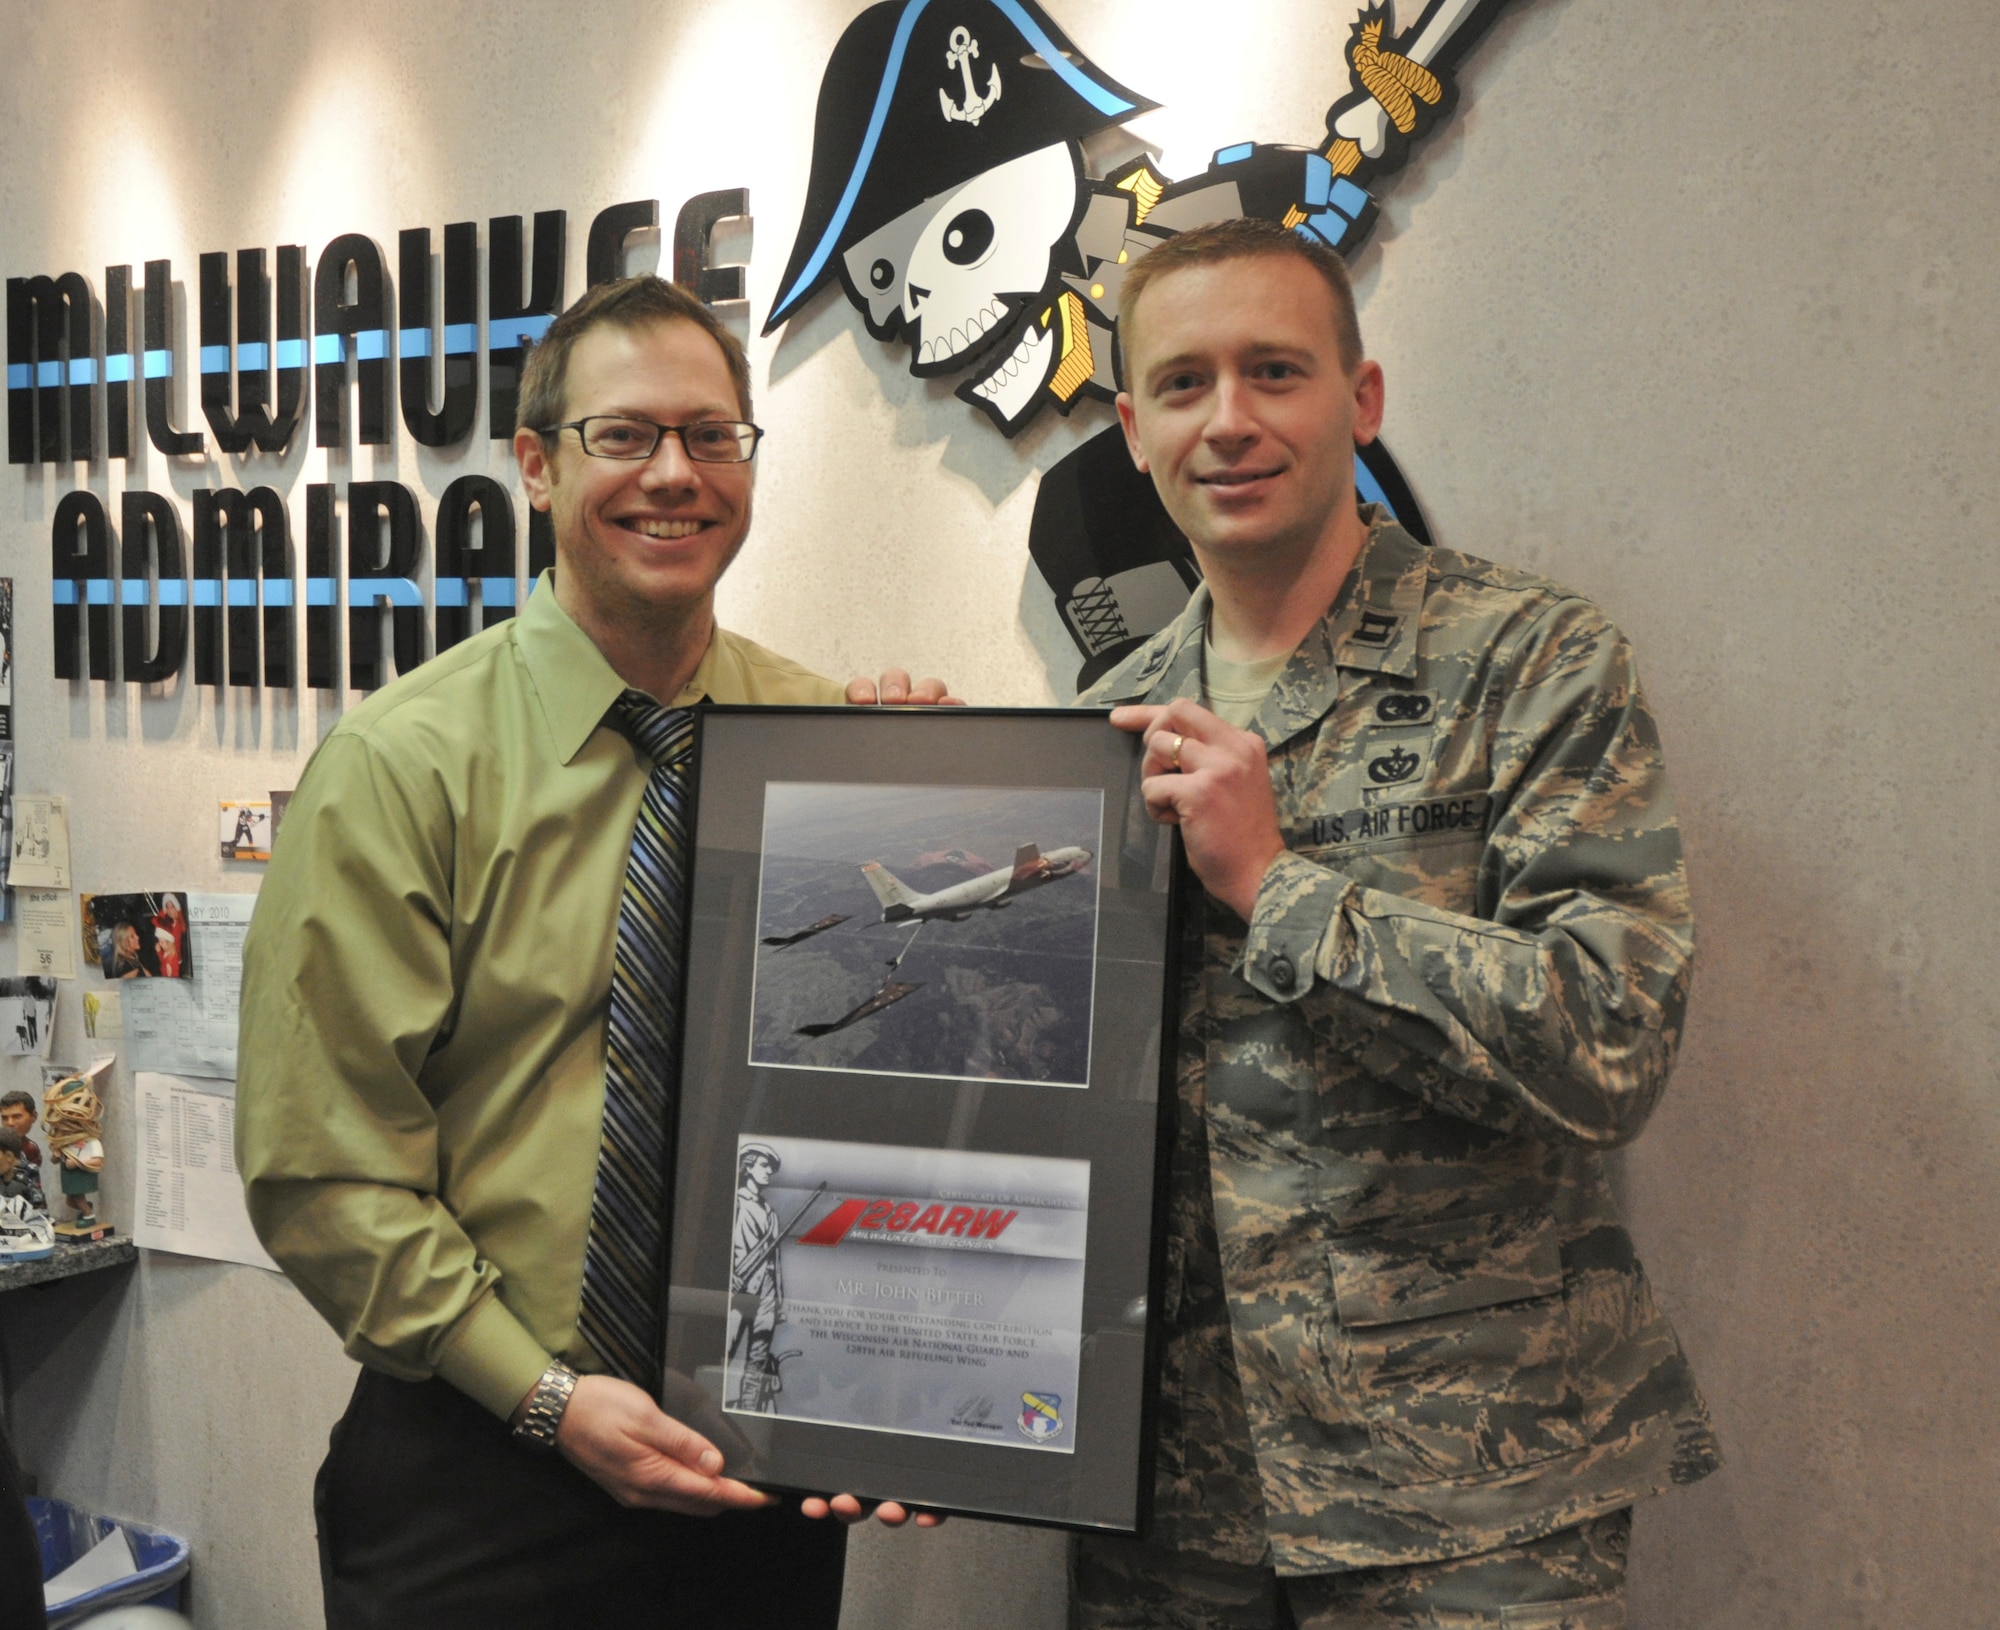 Capt. Aaron Gulczynski presents a certificate of appreciation to Mr. John Bitter of the Milwaukee Admirals.  Mr. Bitter is the group ticket sales manager for the Admirals and for the past 3 years has supported the Wing with discounted tickets and great seats close to the ice.   The 128th had its annual hockey night on January 22nd against the Chicago Wolves with 83 tickets spoken for by members of the wing.  